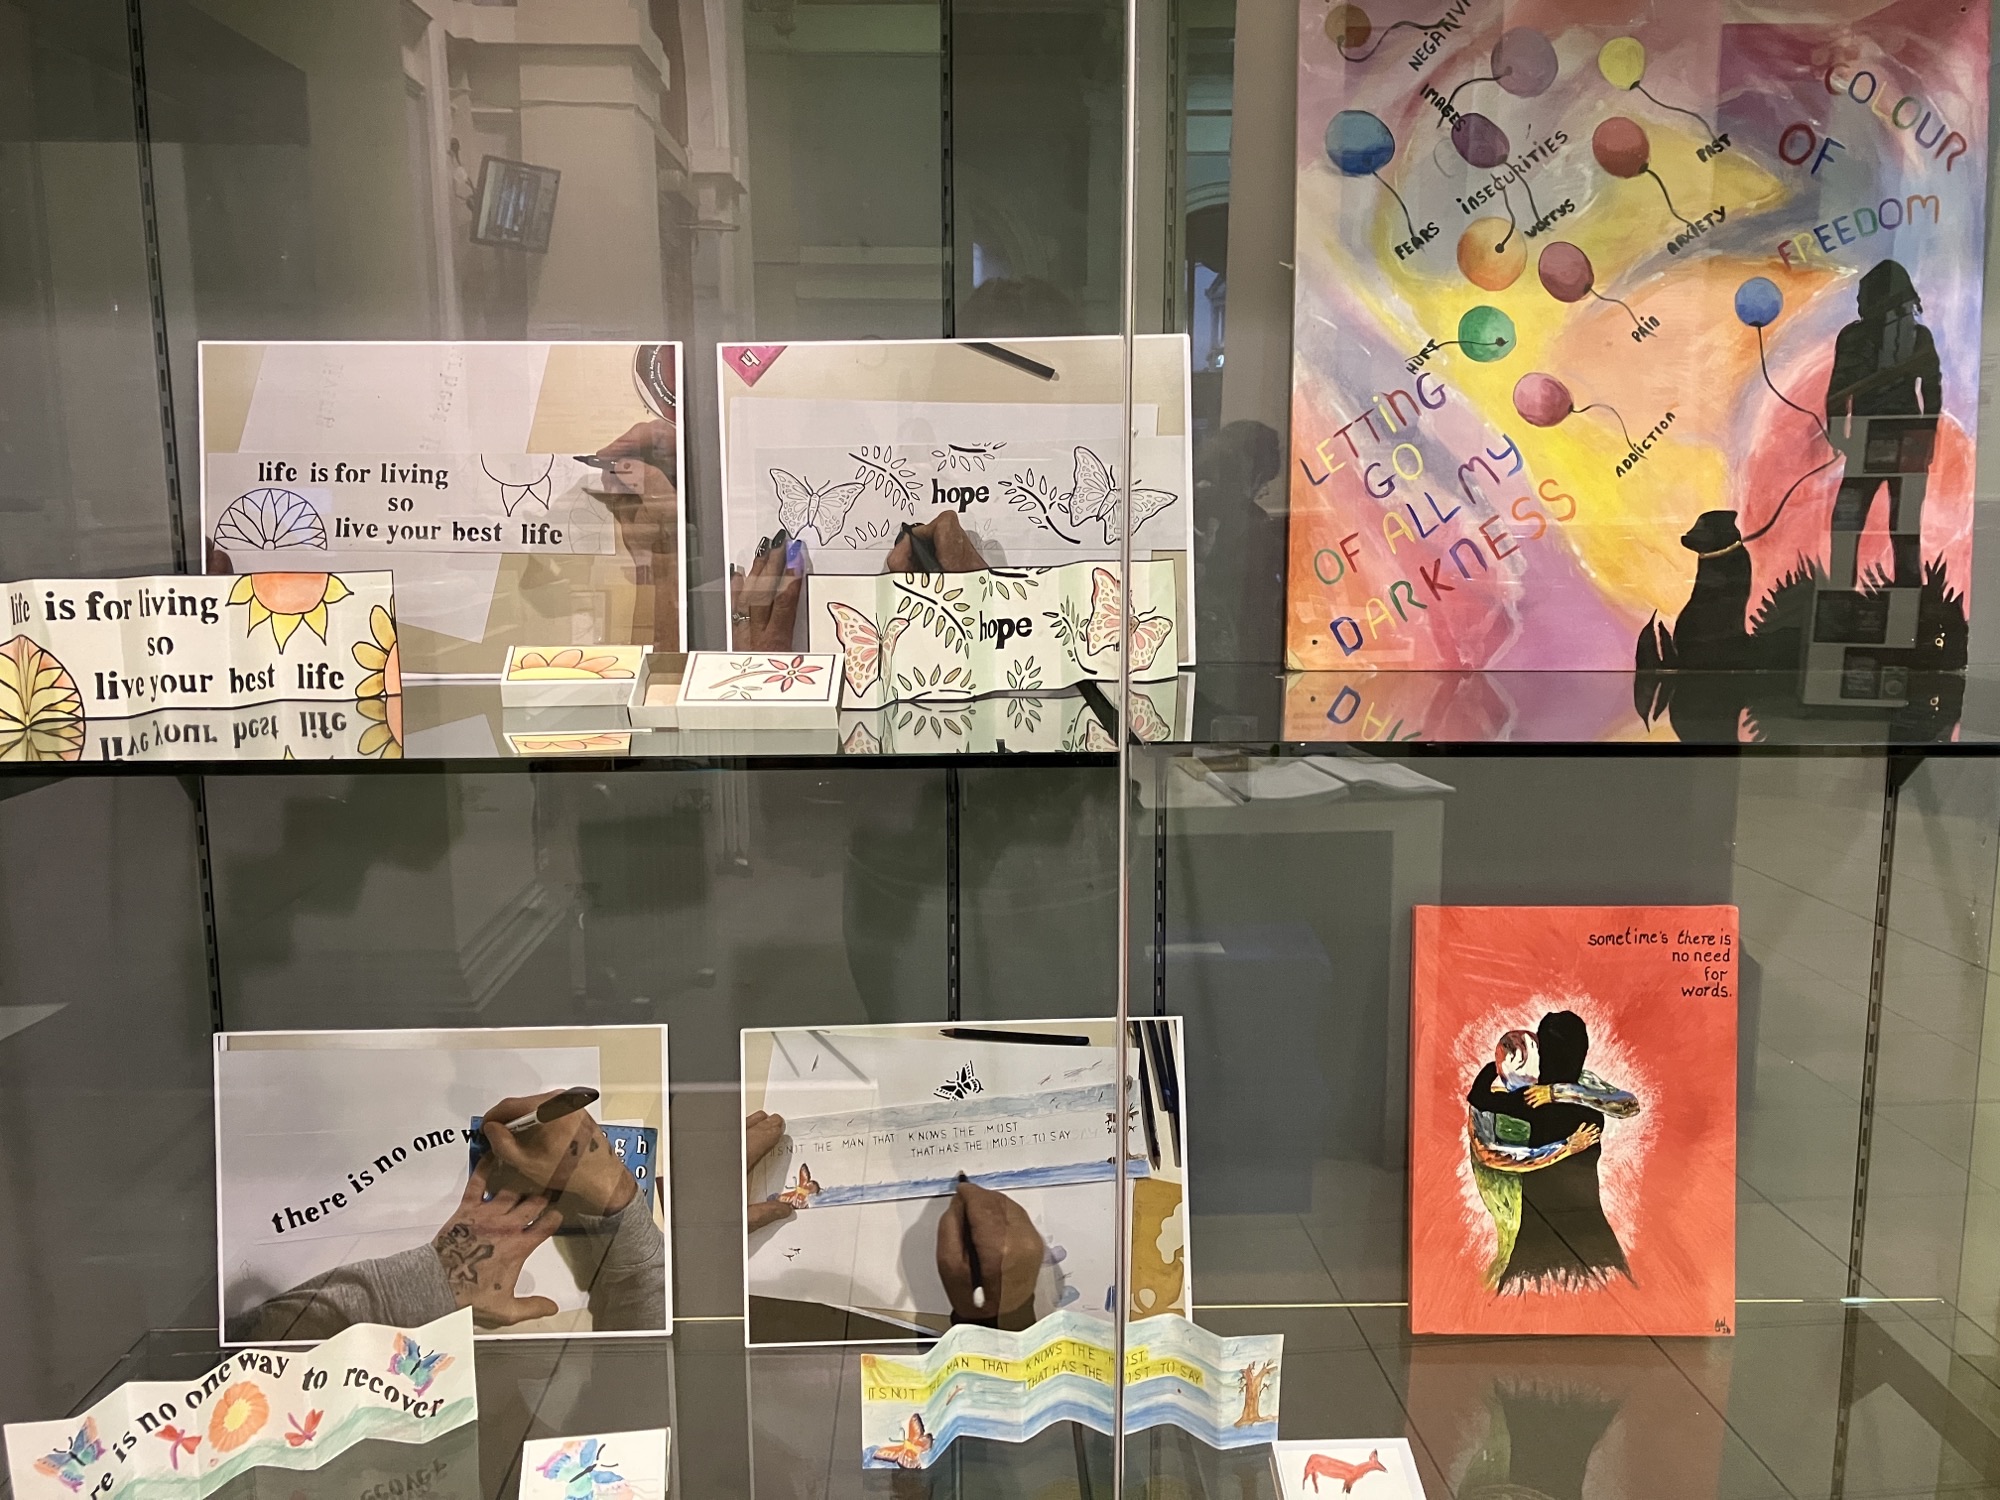 Hope Exhibition on display at Belfast Central Library